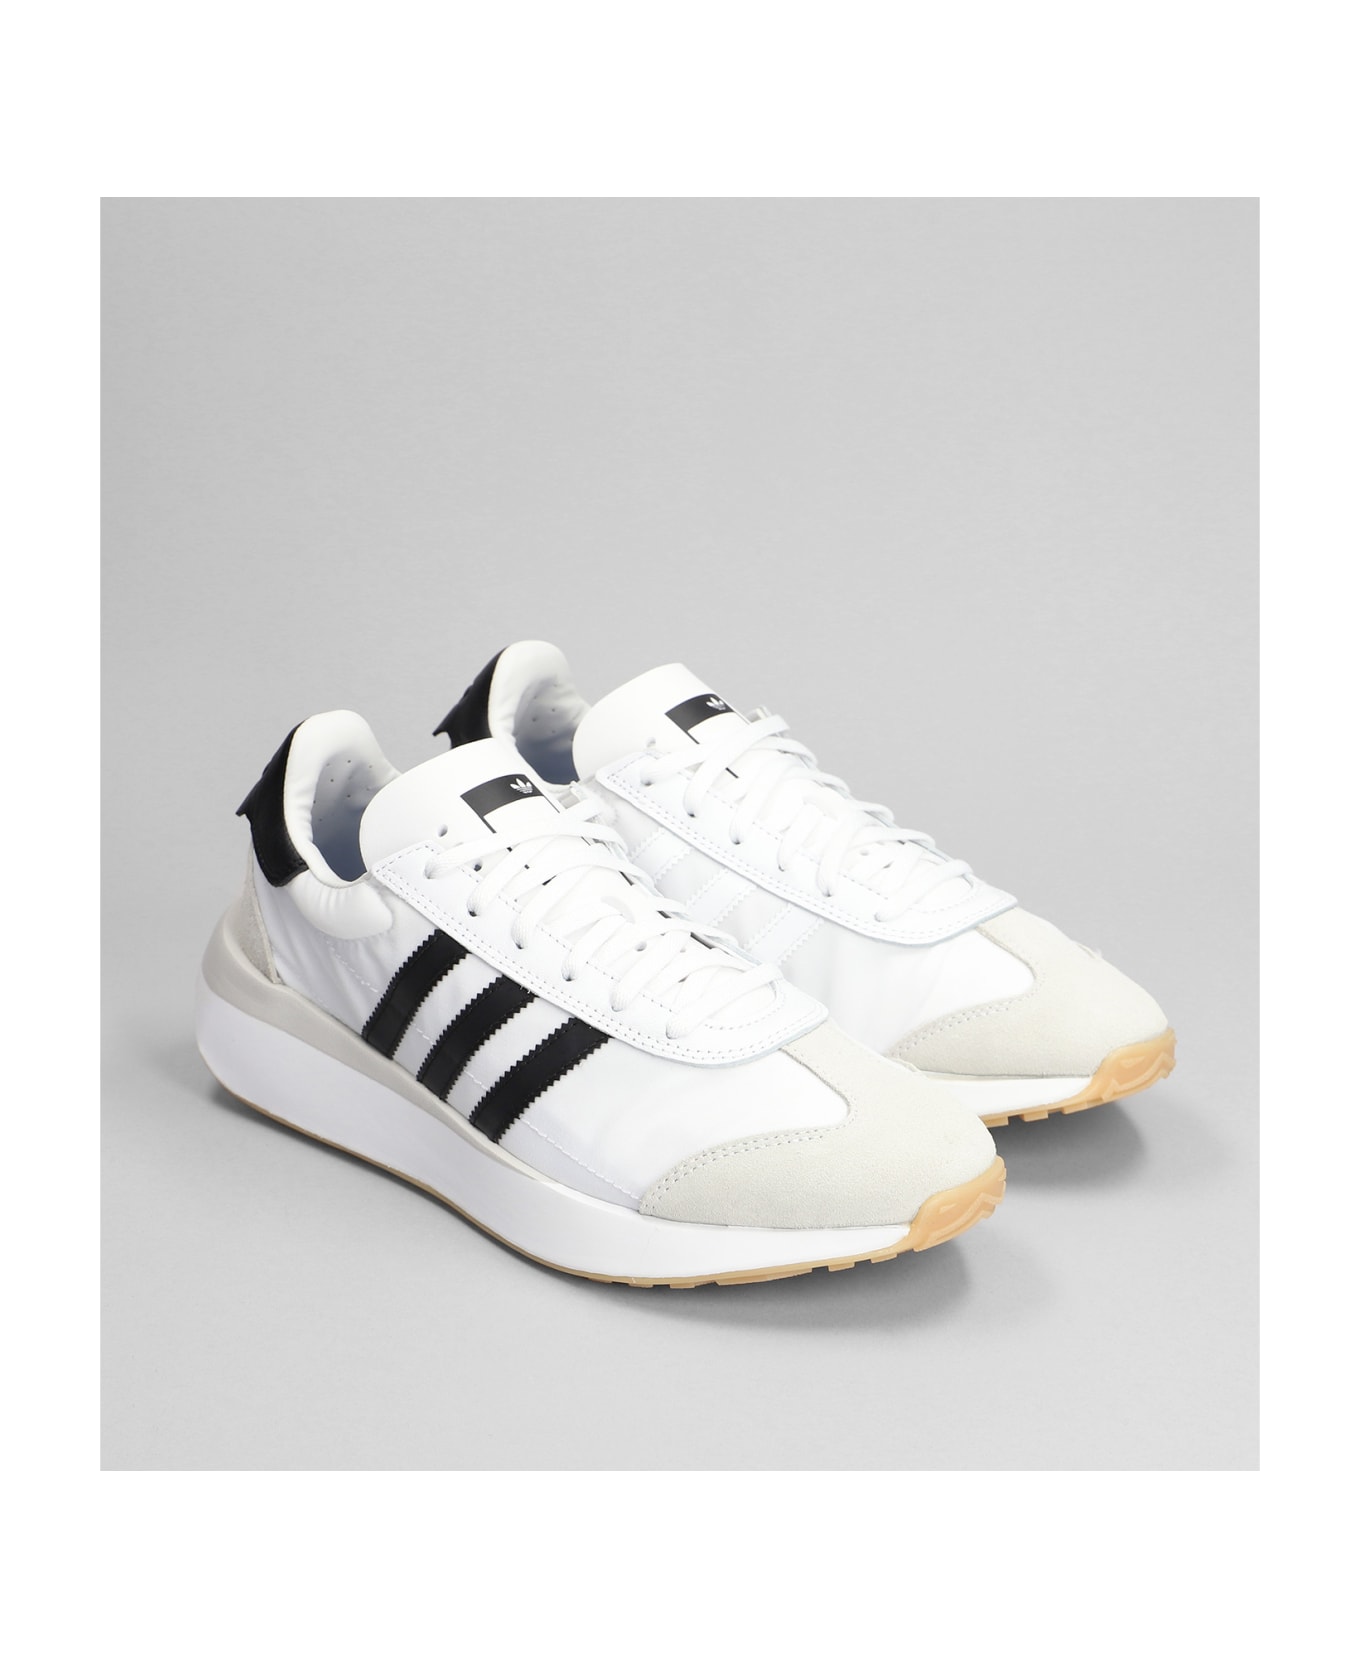 Adidas Originals Country Xlg Sneakers In White Synthetic Fibers - white